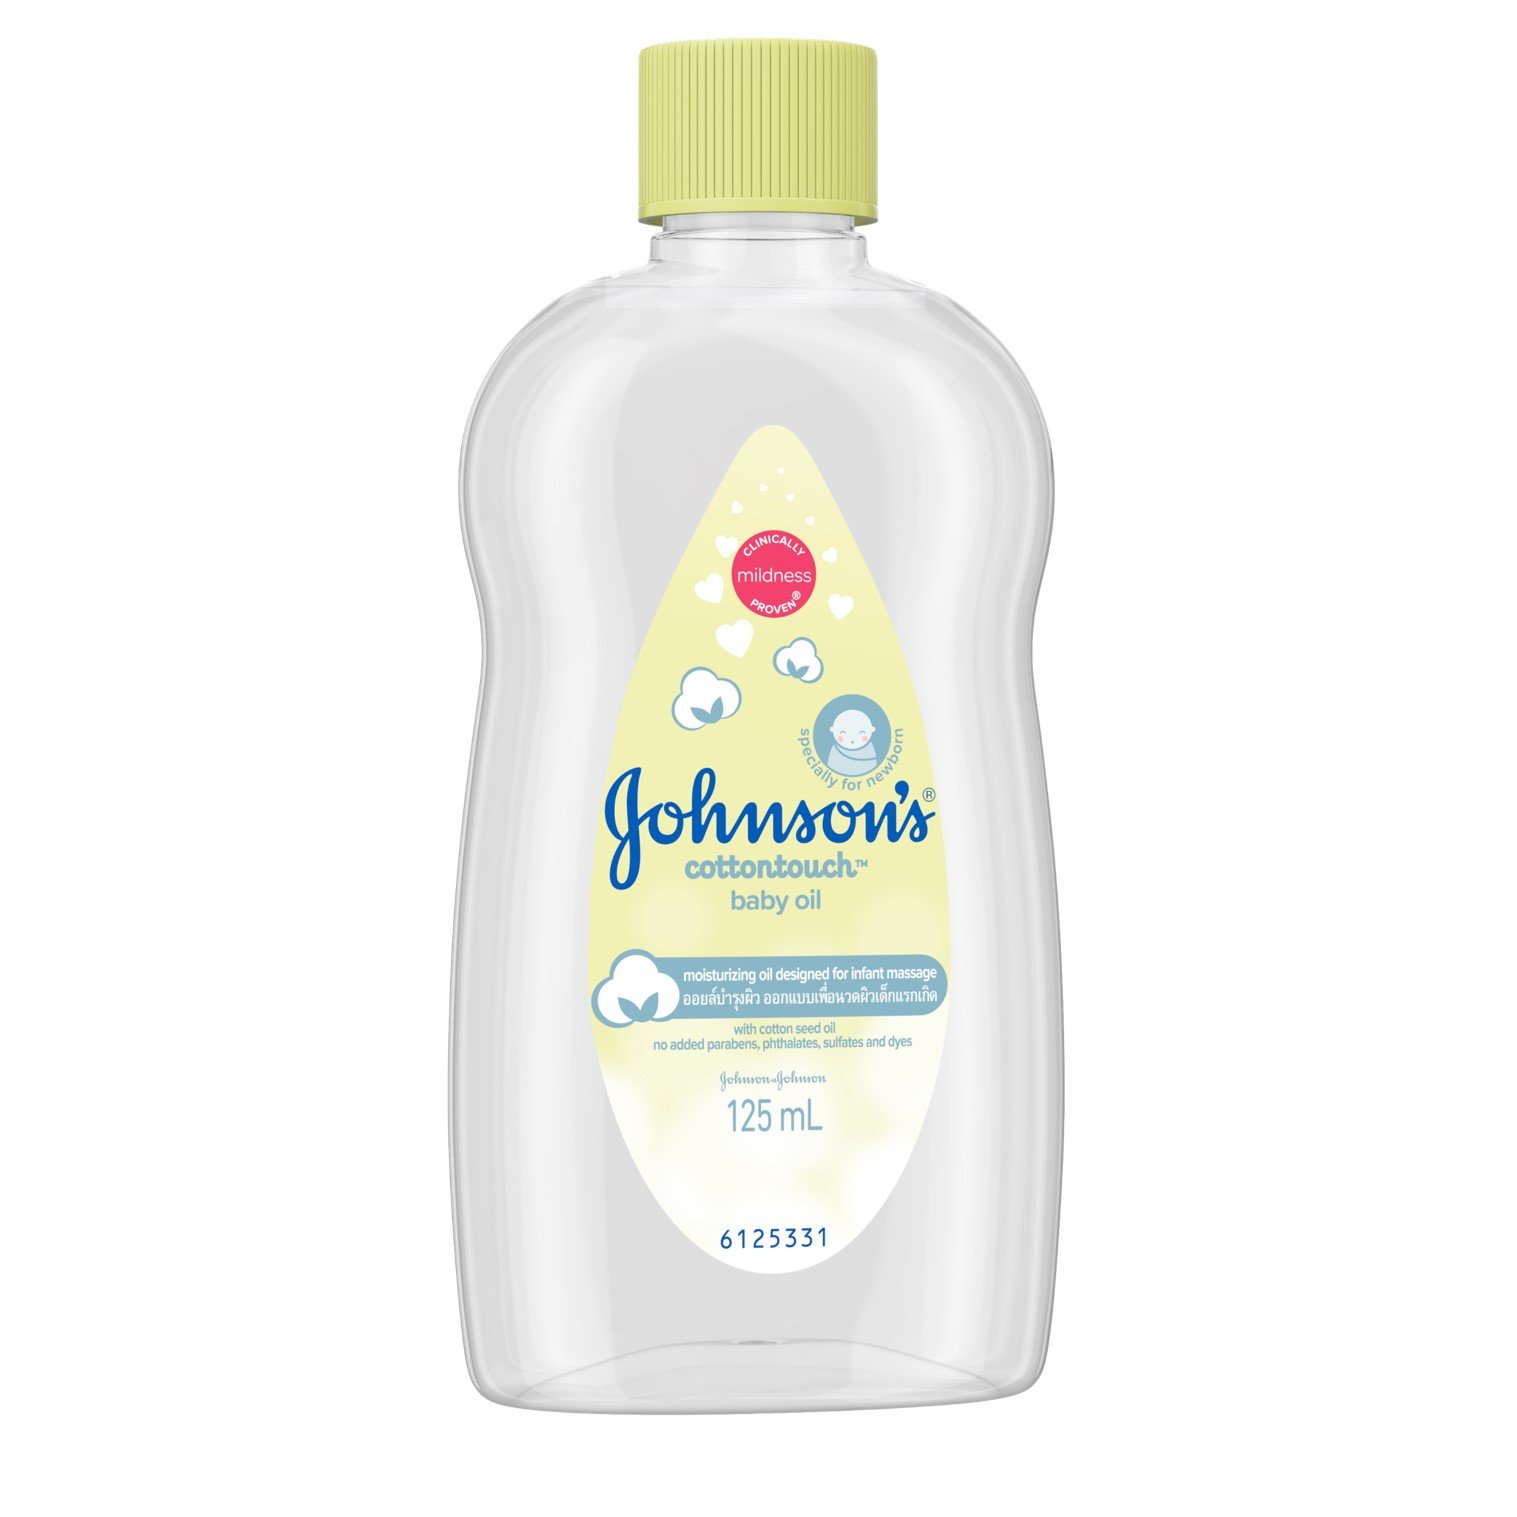 Johnson's® Cottontouch™ Baby Oil